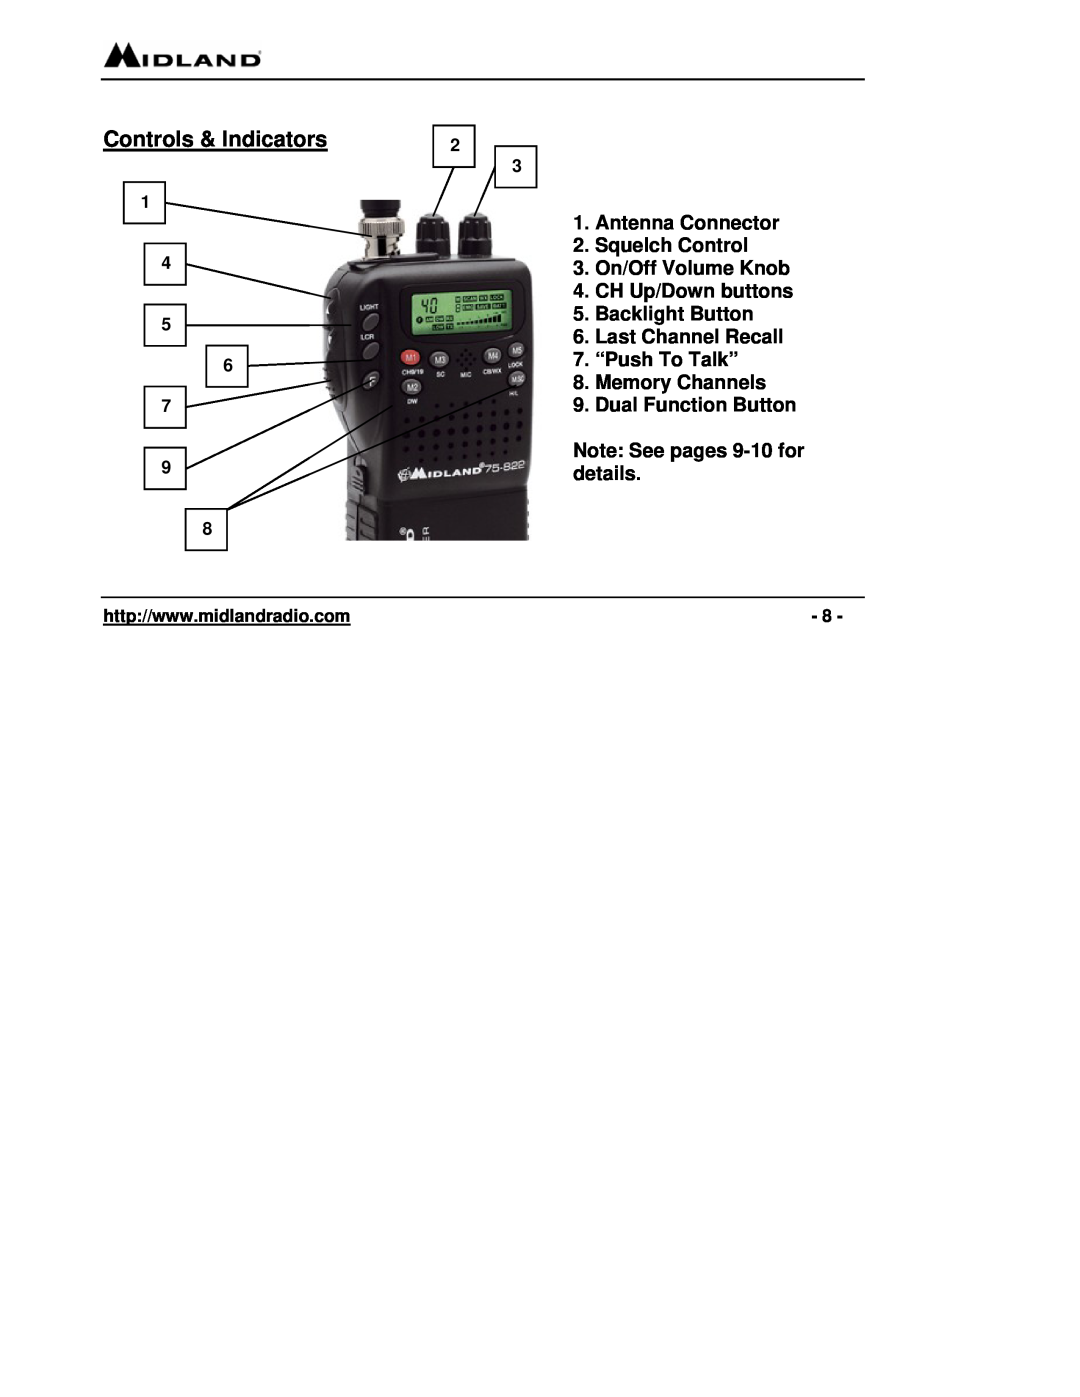 Midland Radio 75-822 owner manual Controls & Indicators, Antenna Connector 2. Squelch Control 3. On/Off Volume Knob 